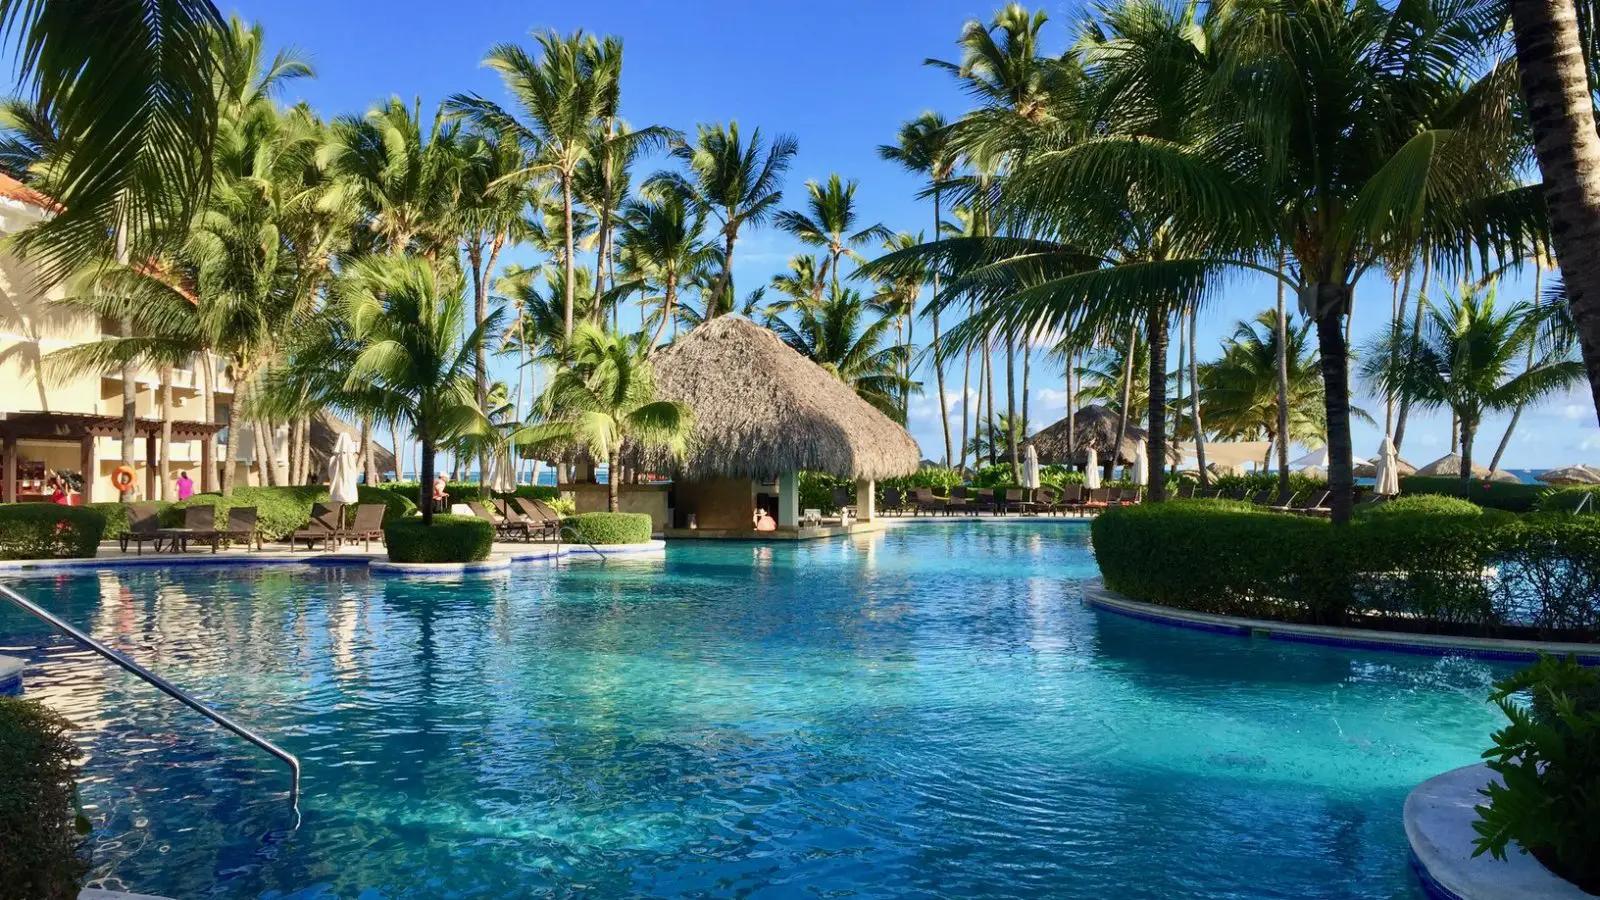 Gorgeous pool and swim-up bar at Dominican Republic resort. Full Life, Full Passport's honeymoon planning service can help you find the best destination!